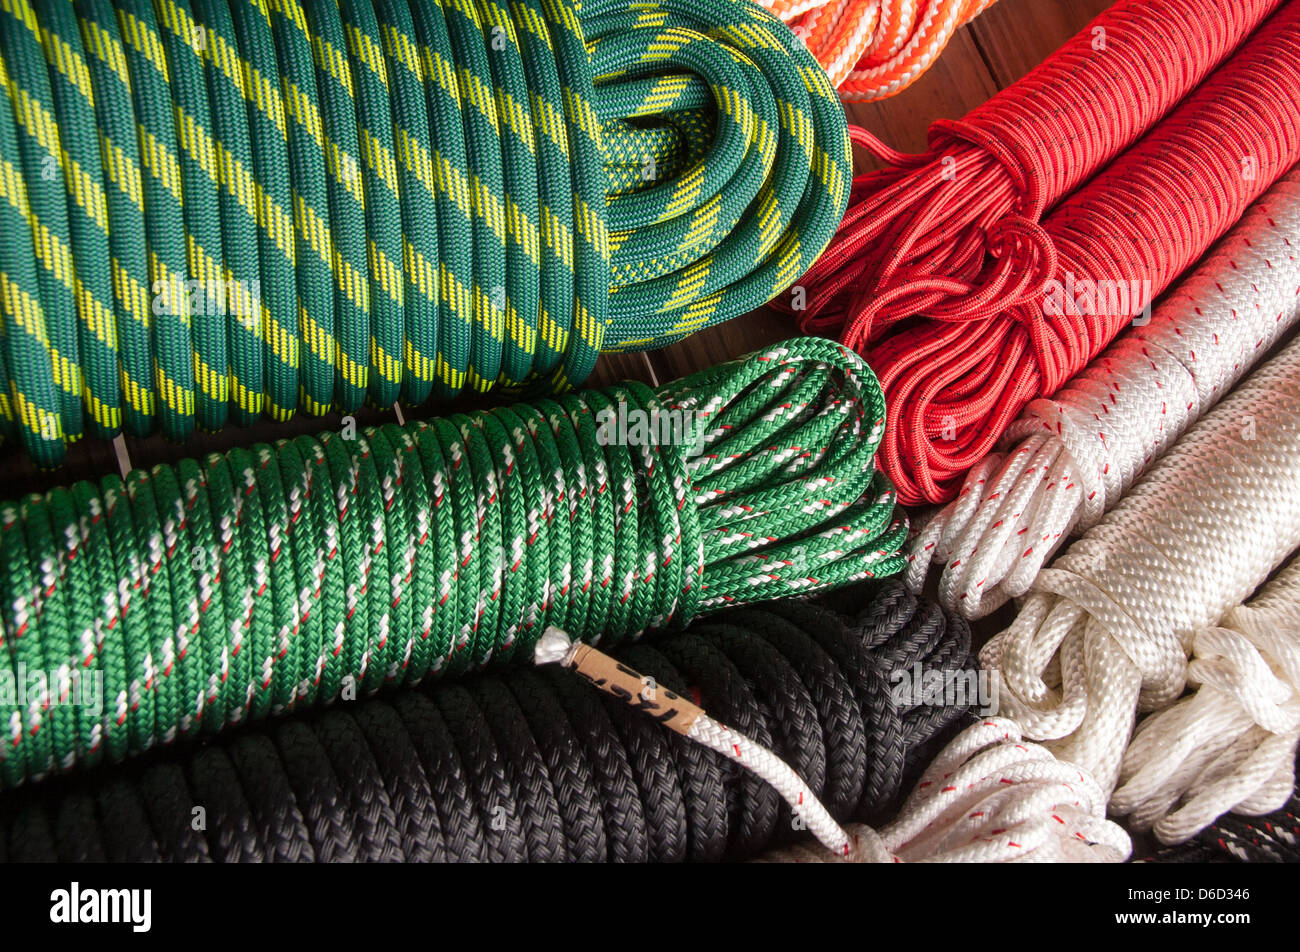 A picture of many rolls of colored rope. Stock Photo